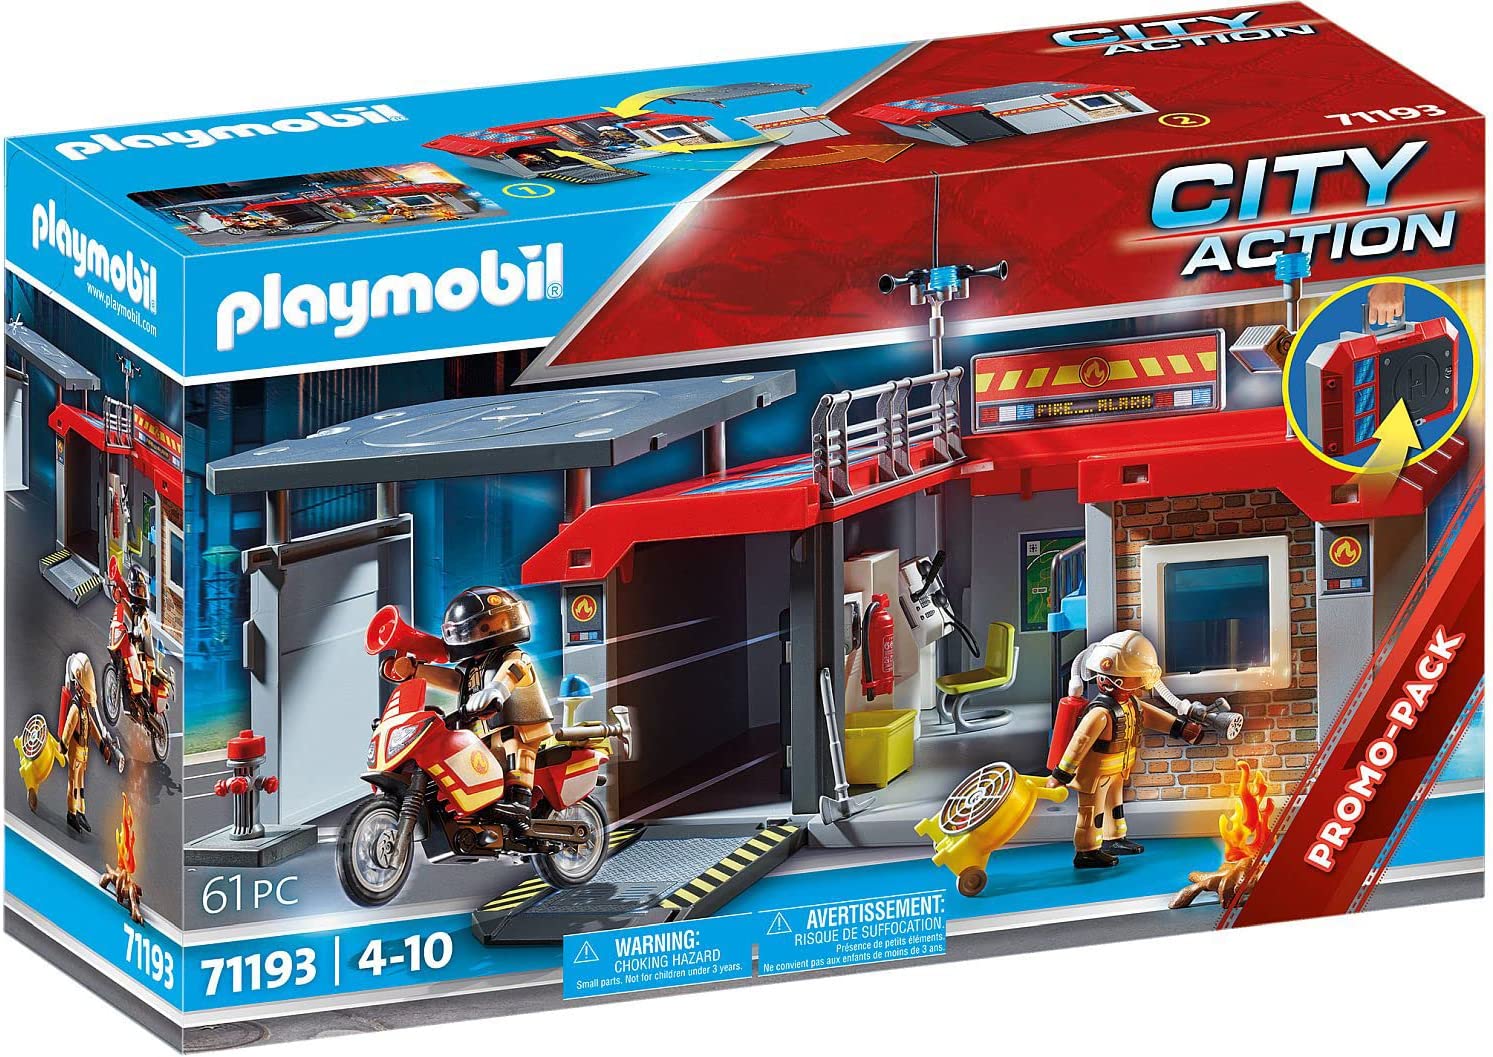 PLAYMOBIL City Action 71193 Take-On Fire Station with Fire Brigade Motorcycle, Hinged Play Box with Handle, Travel Toy, Toy for Children from 4 Years